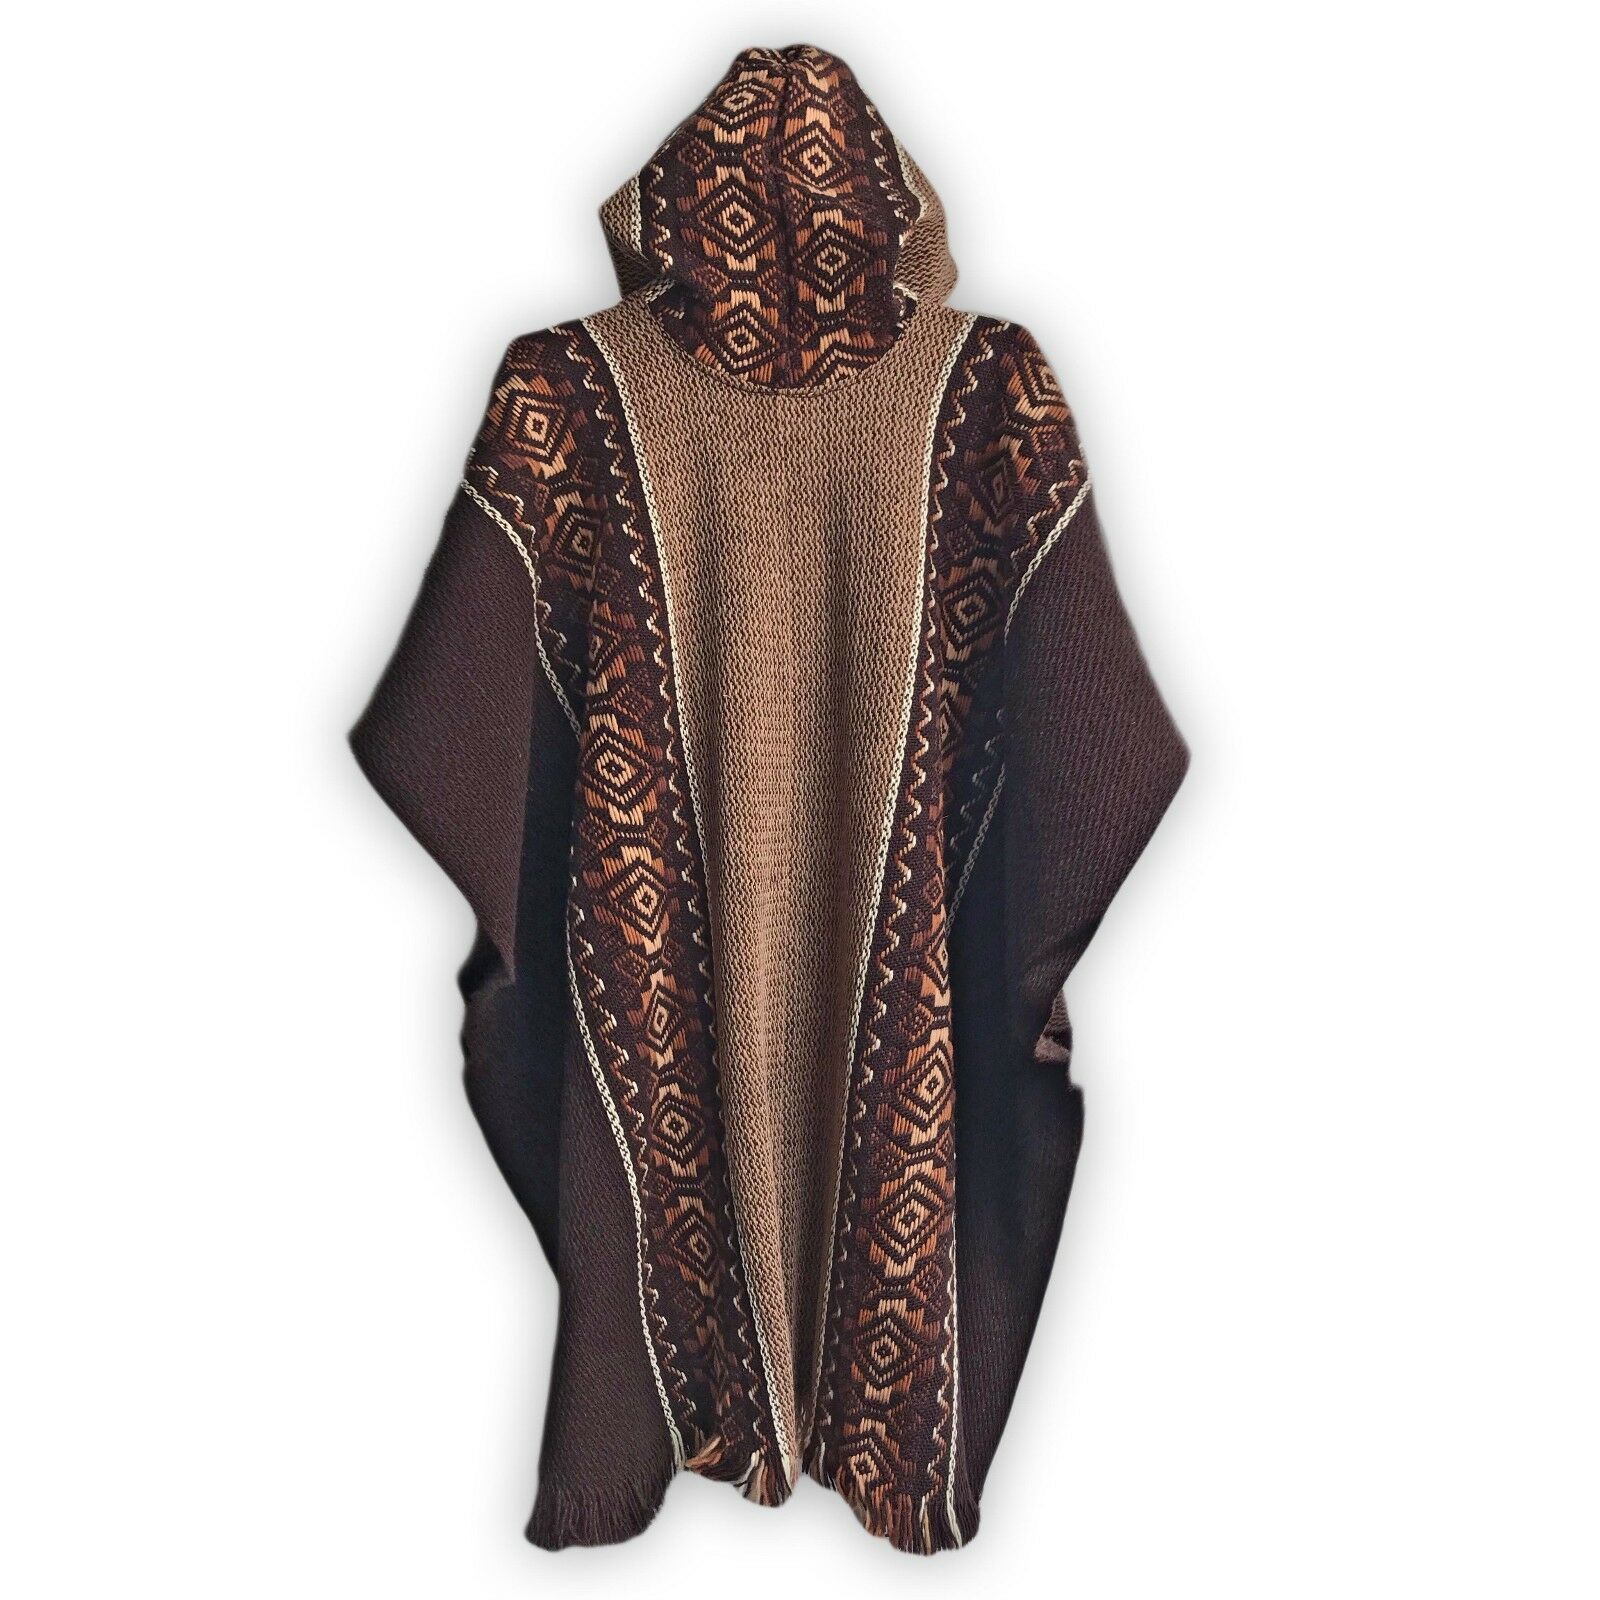 Llama Wool Unisex South American Handwoven Hooded Poncho - solid brown with diamonds pattern